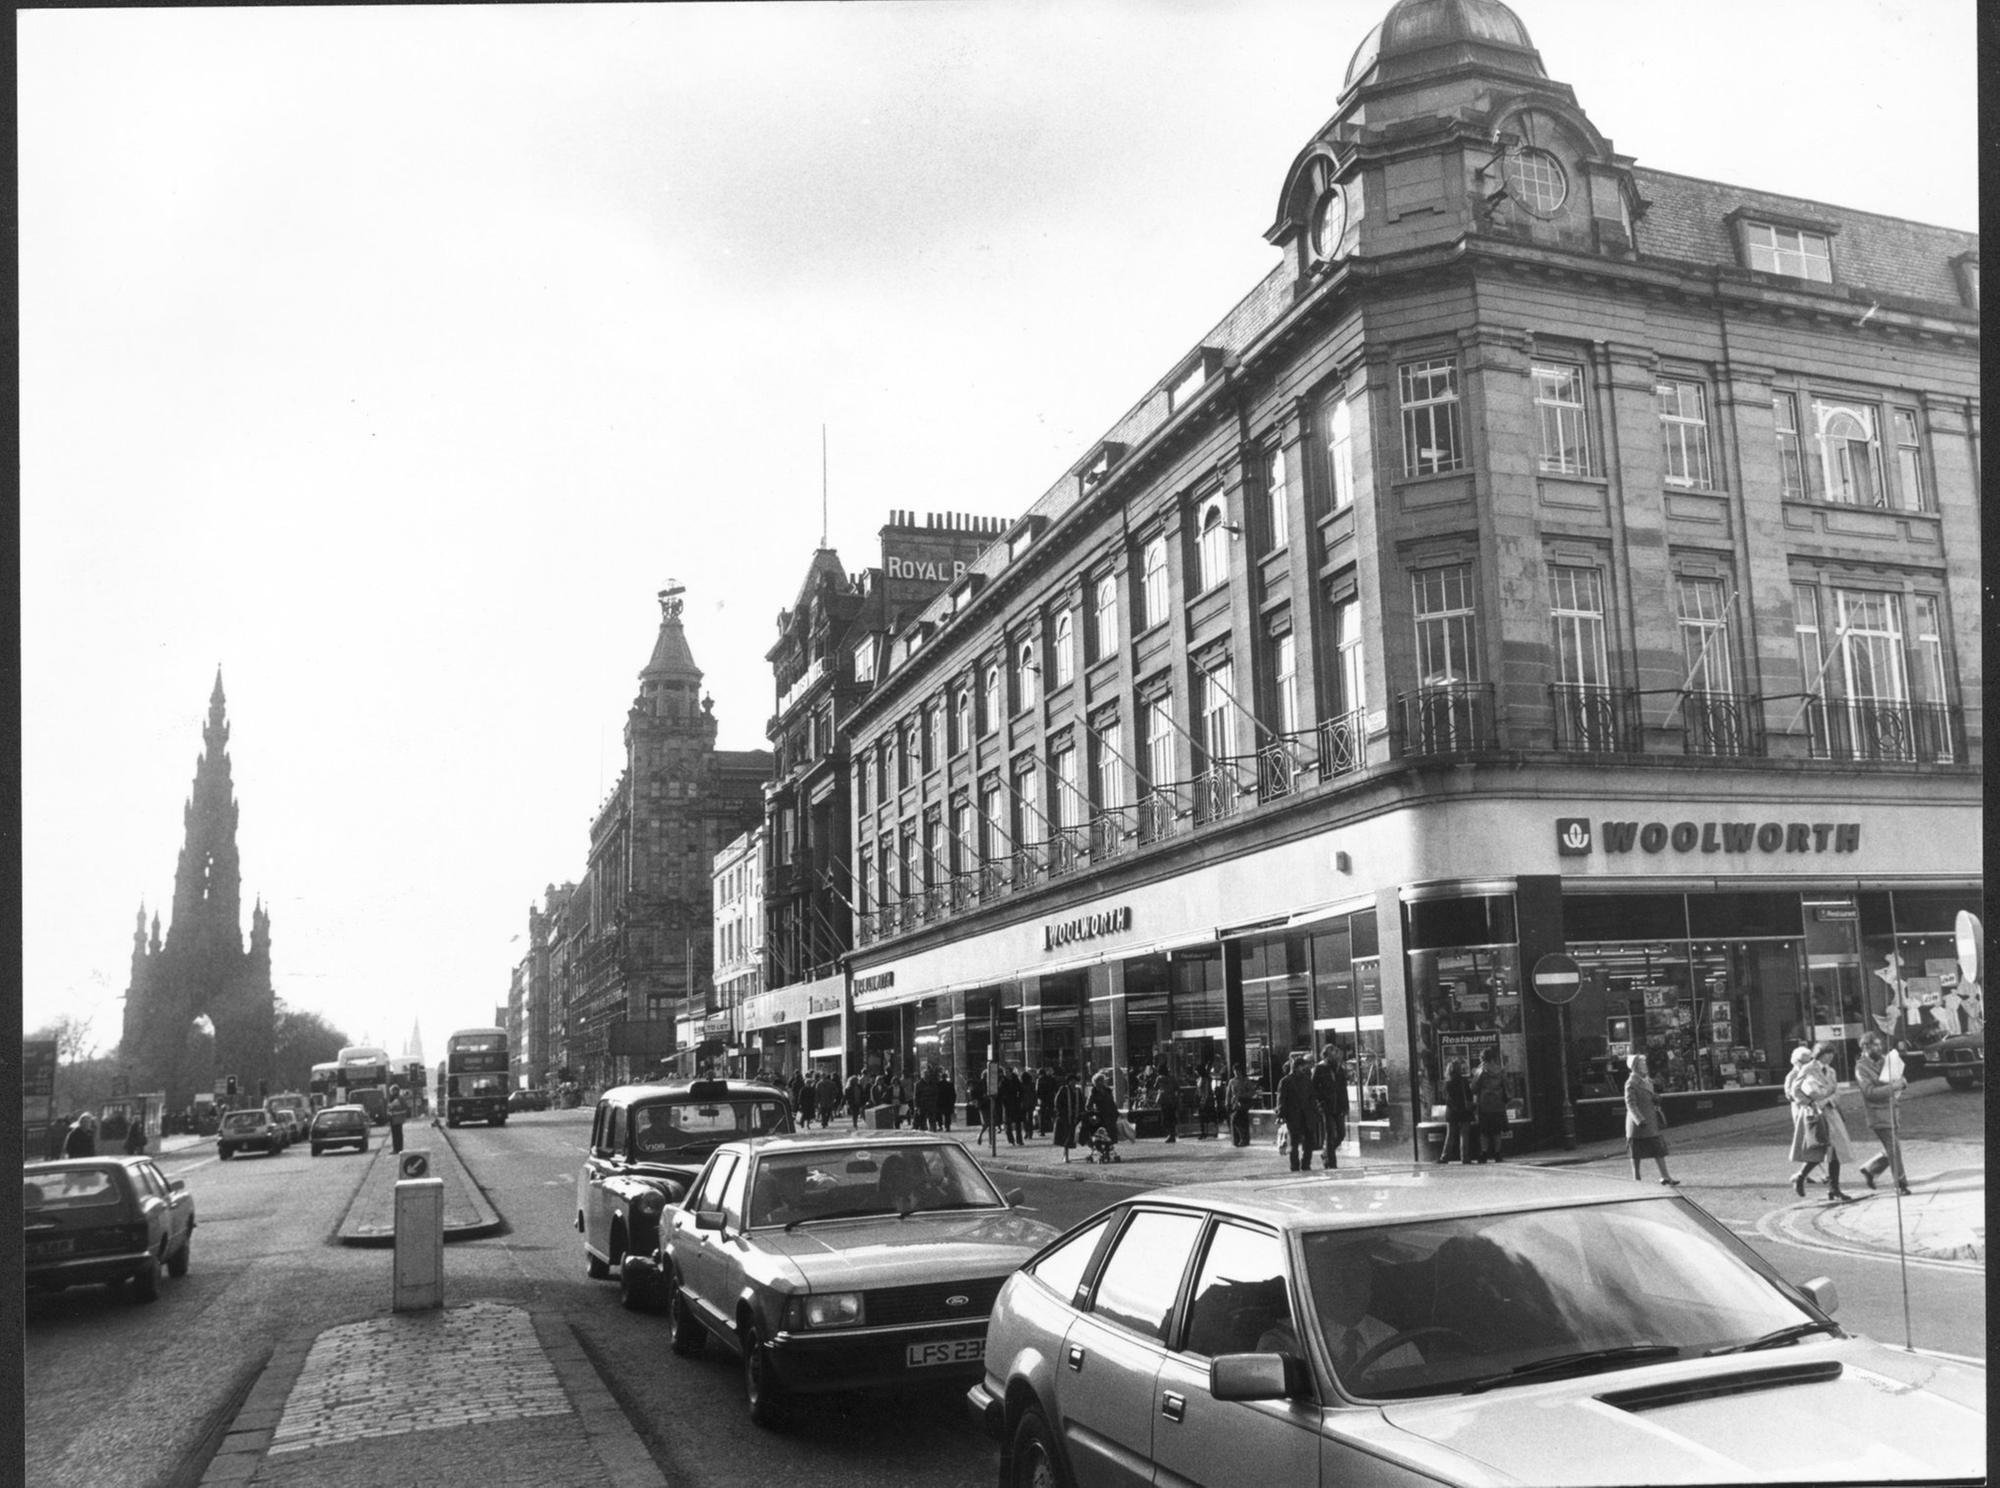 edinburgh retro: 17 photos of edinburgh's lost woolworths stores as iconic brand gears up for shock comeback